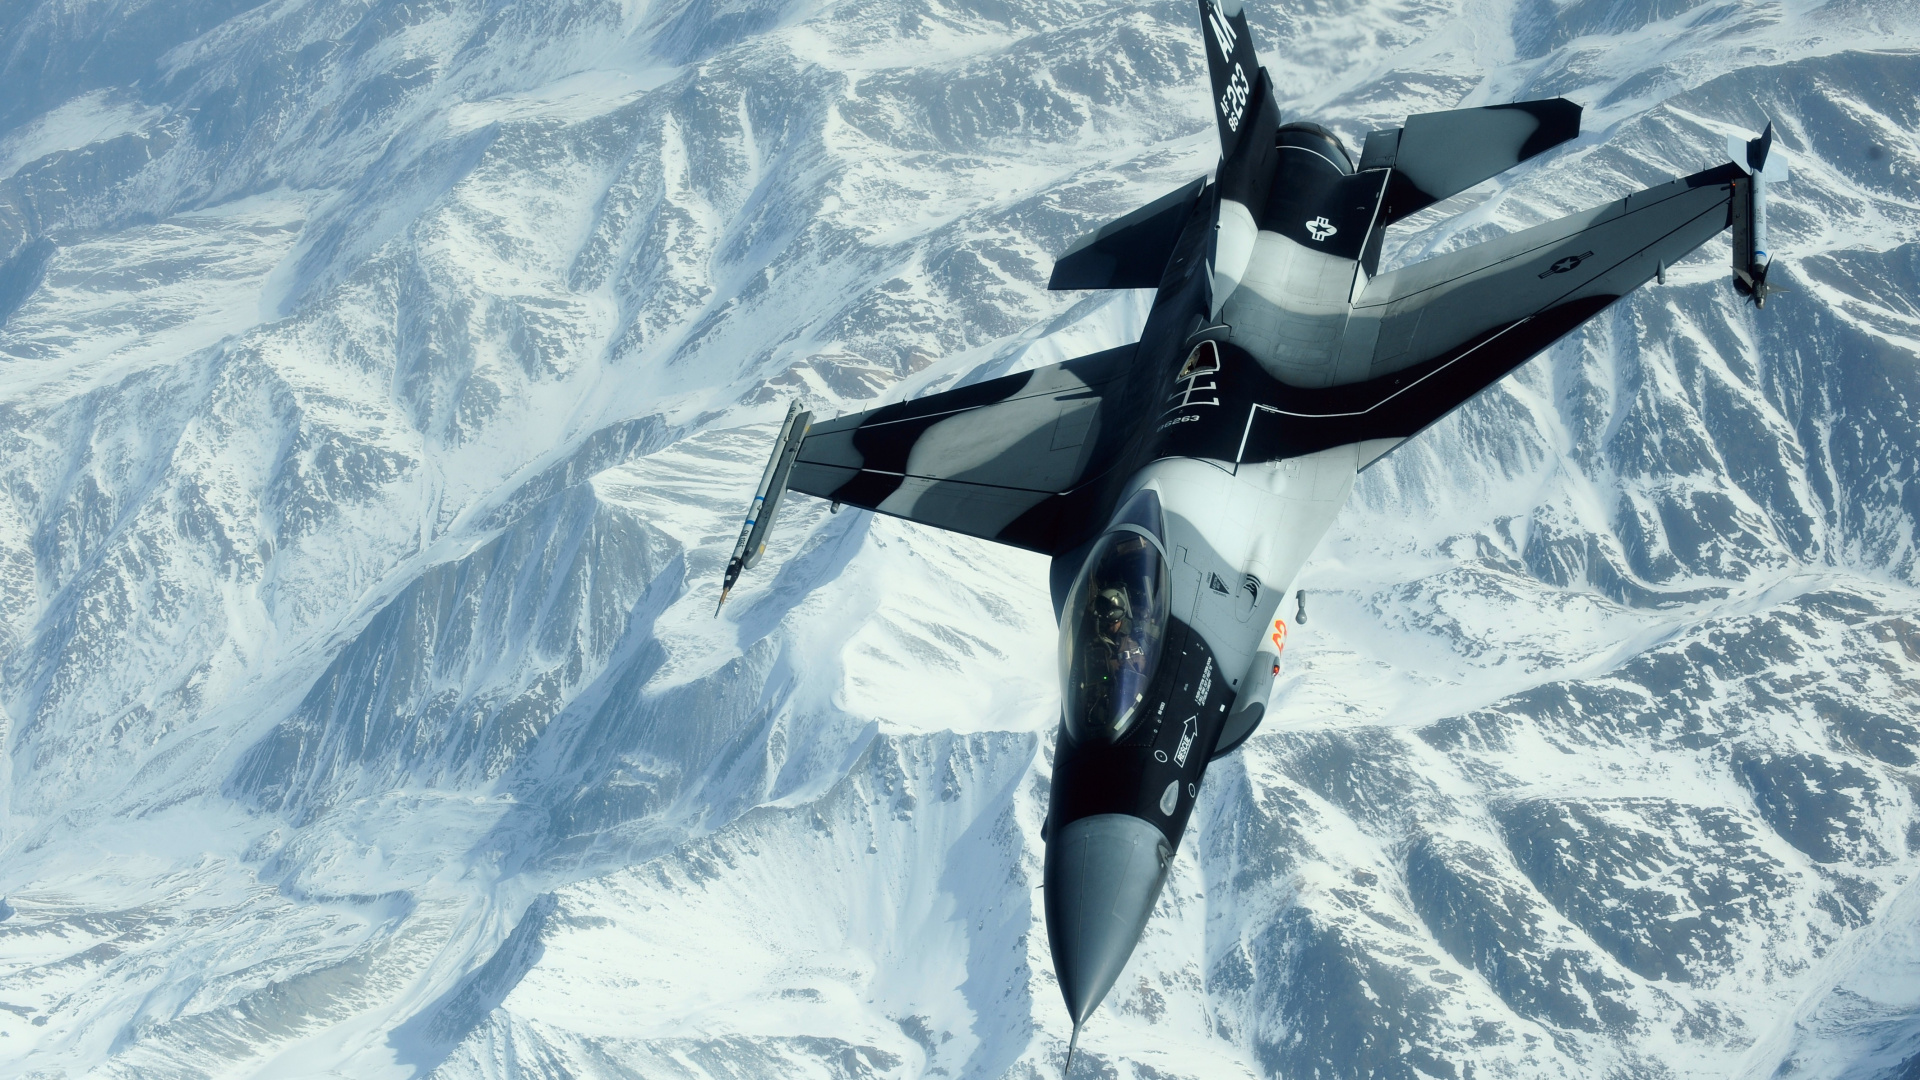 Black and White Jet Plane Flying Over Snow Covered Mountain During Daytime. Wallpaper in 1920x1080 Resolution